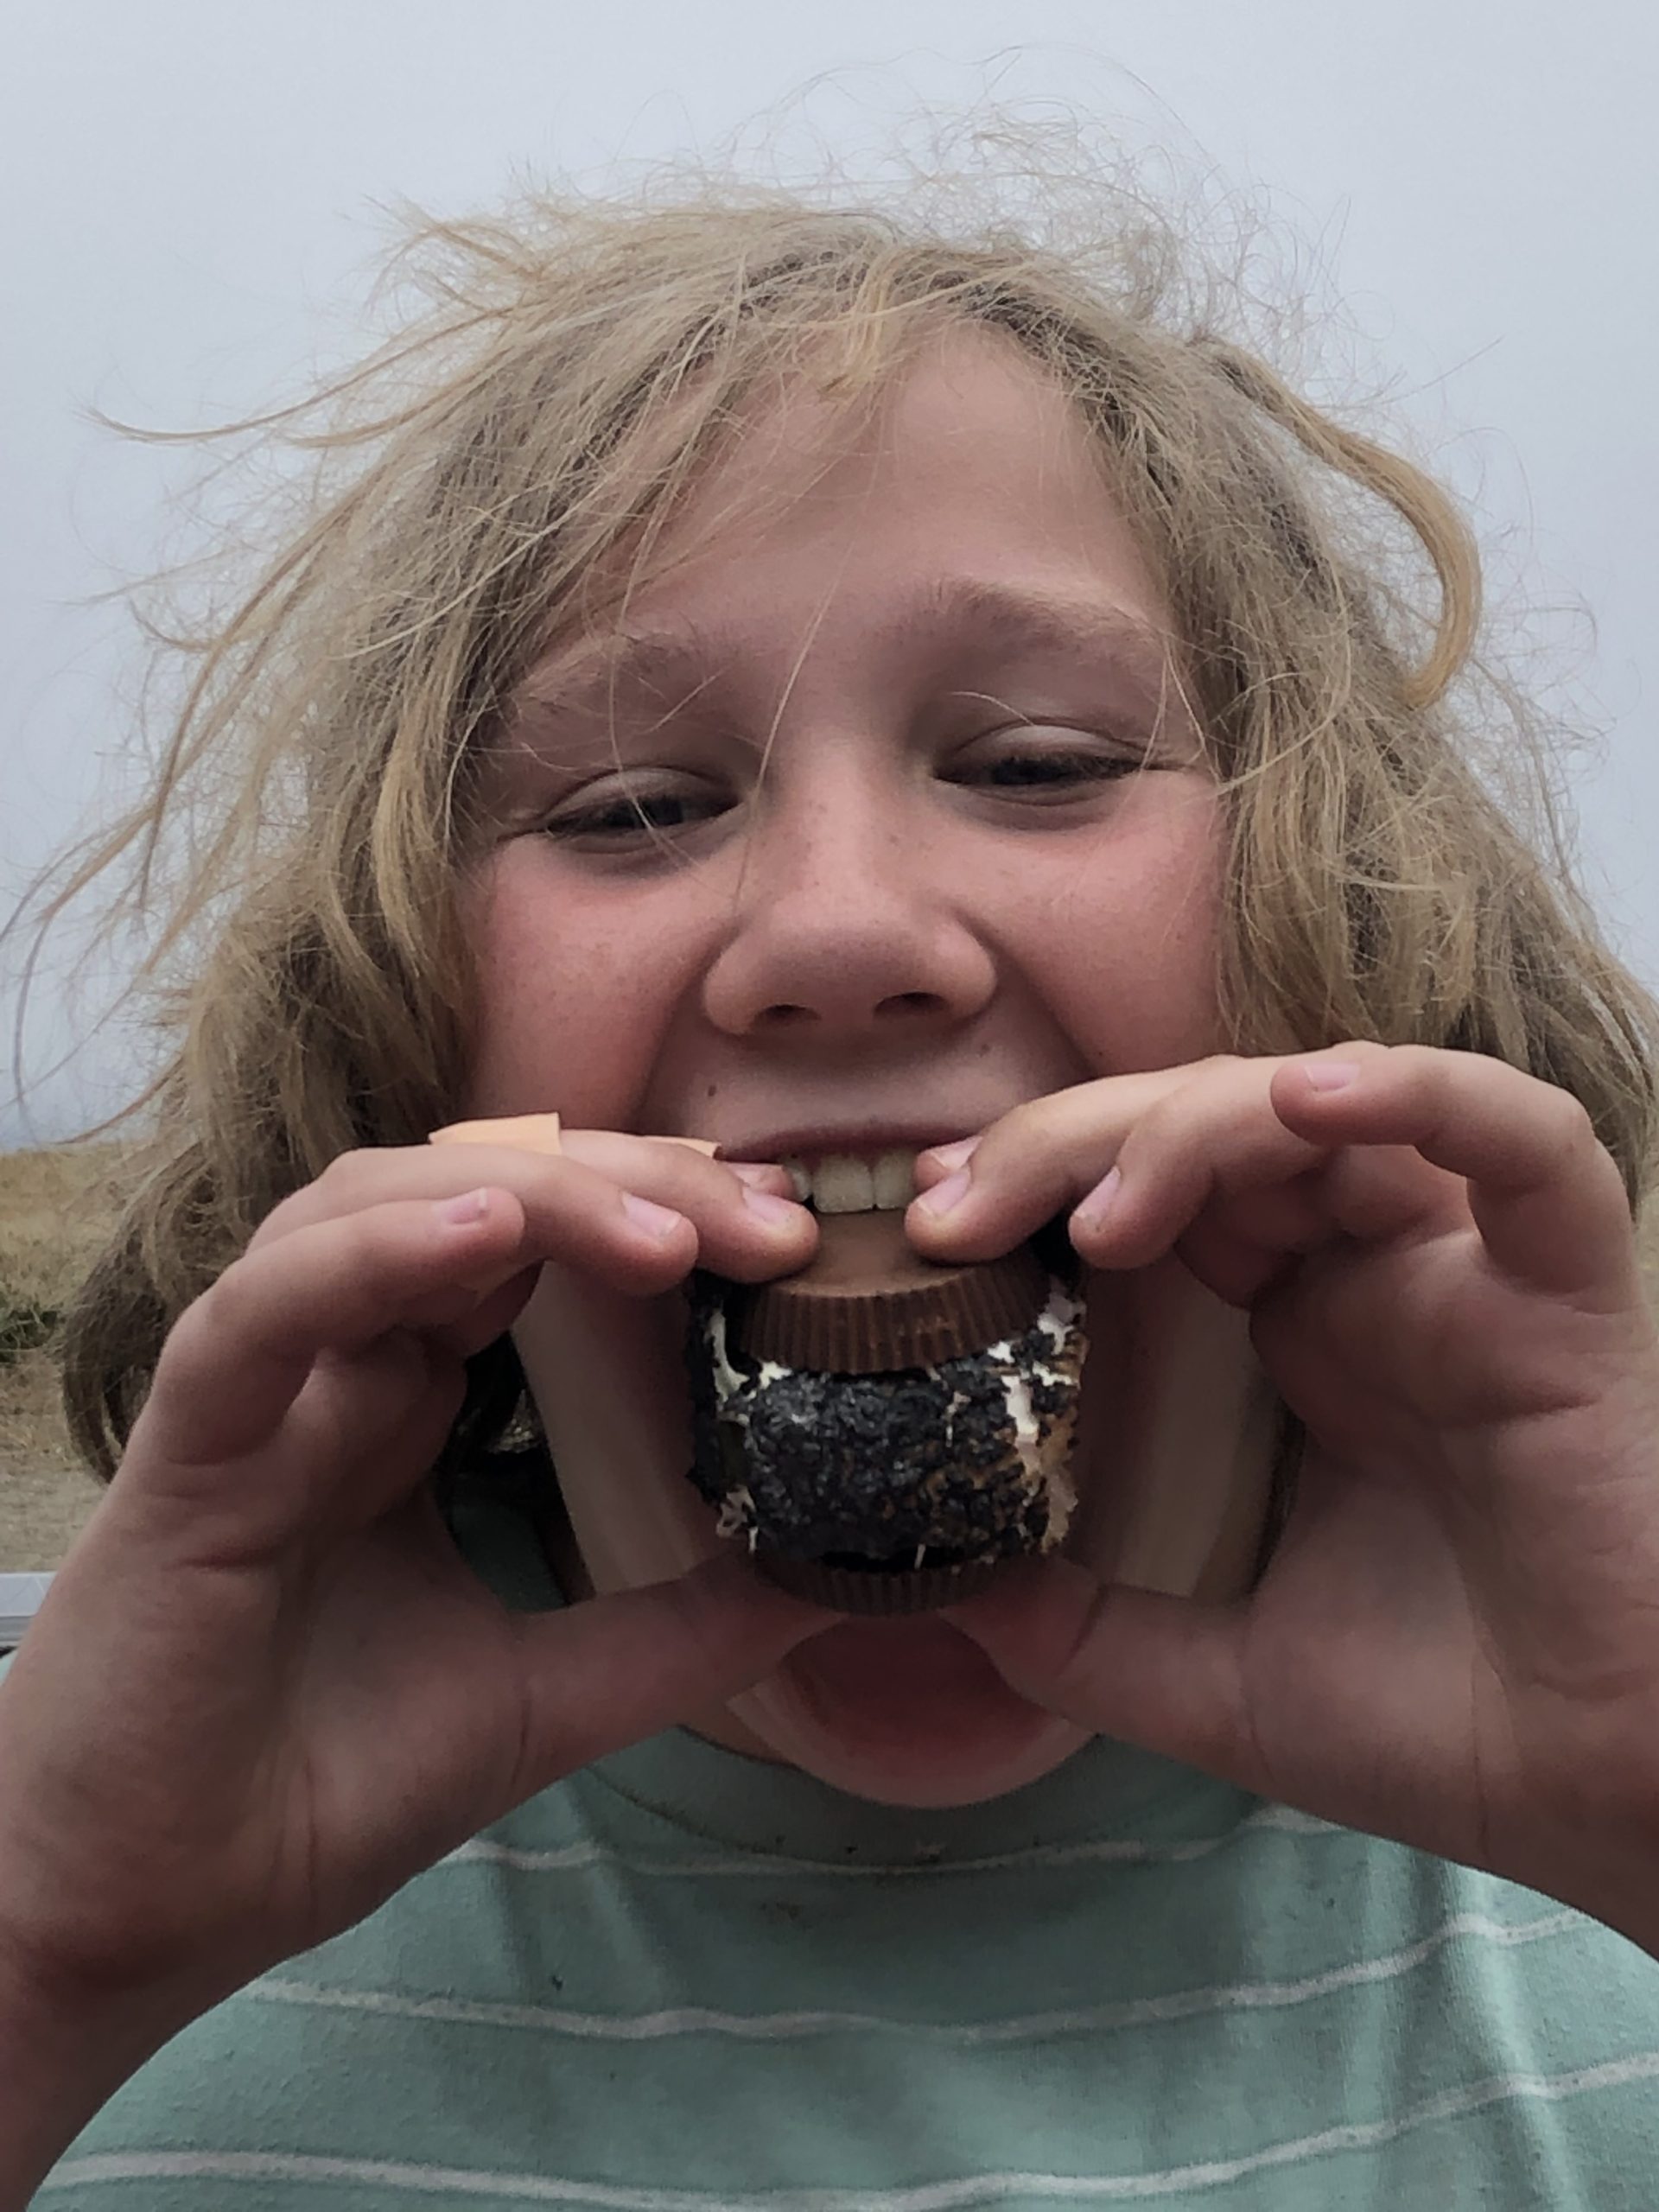 A young girl is holding a chocolate donut in her mouth.